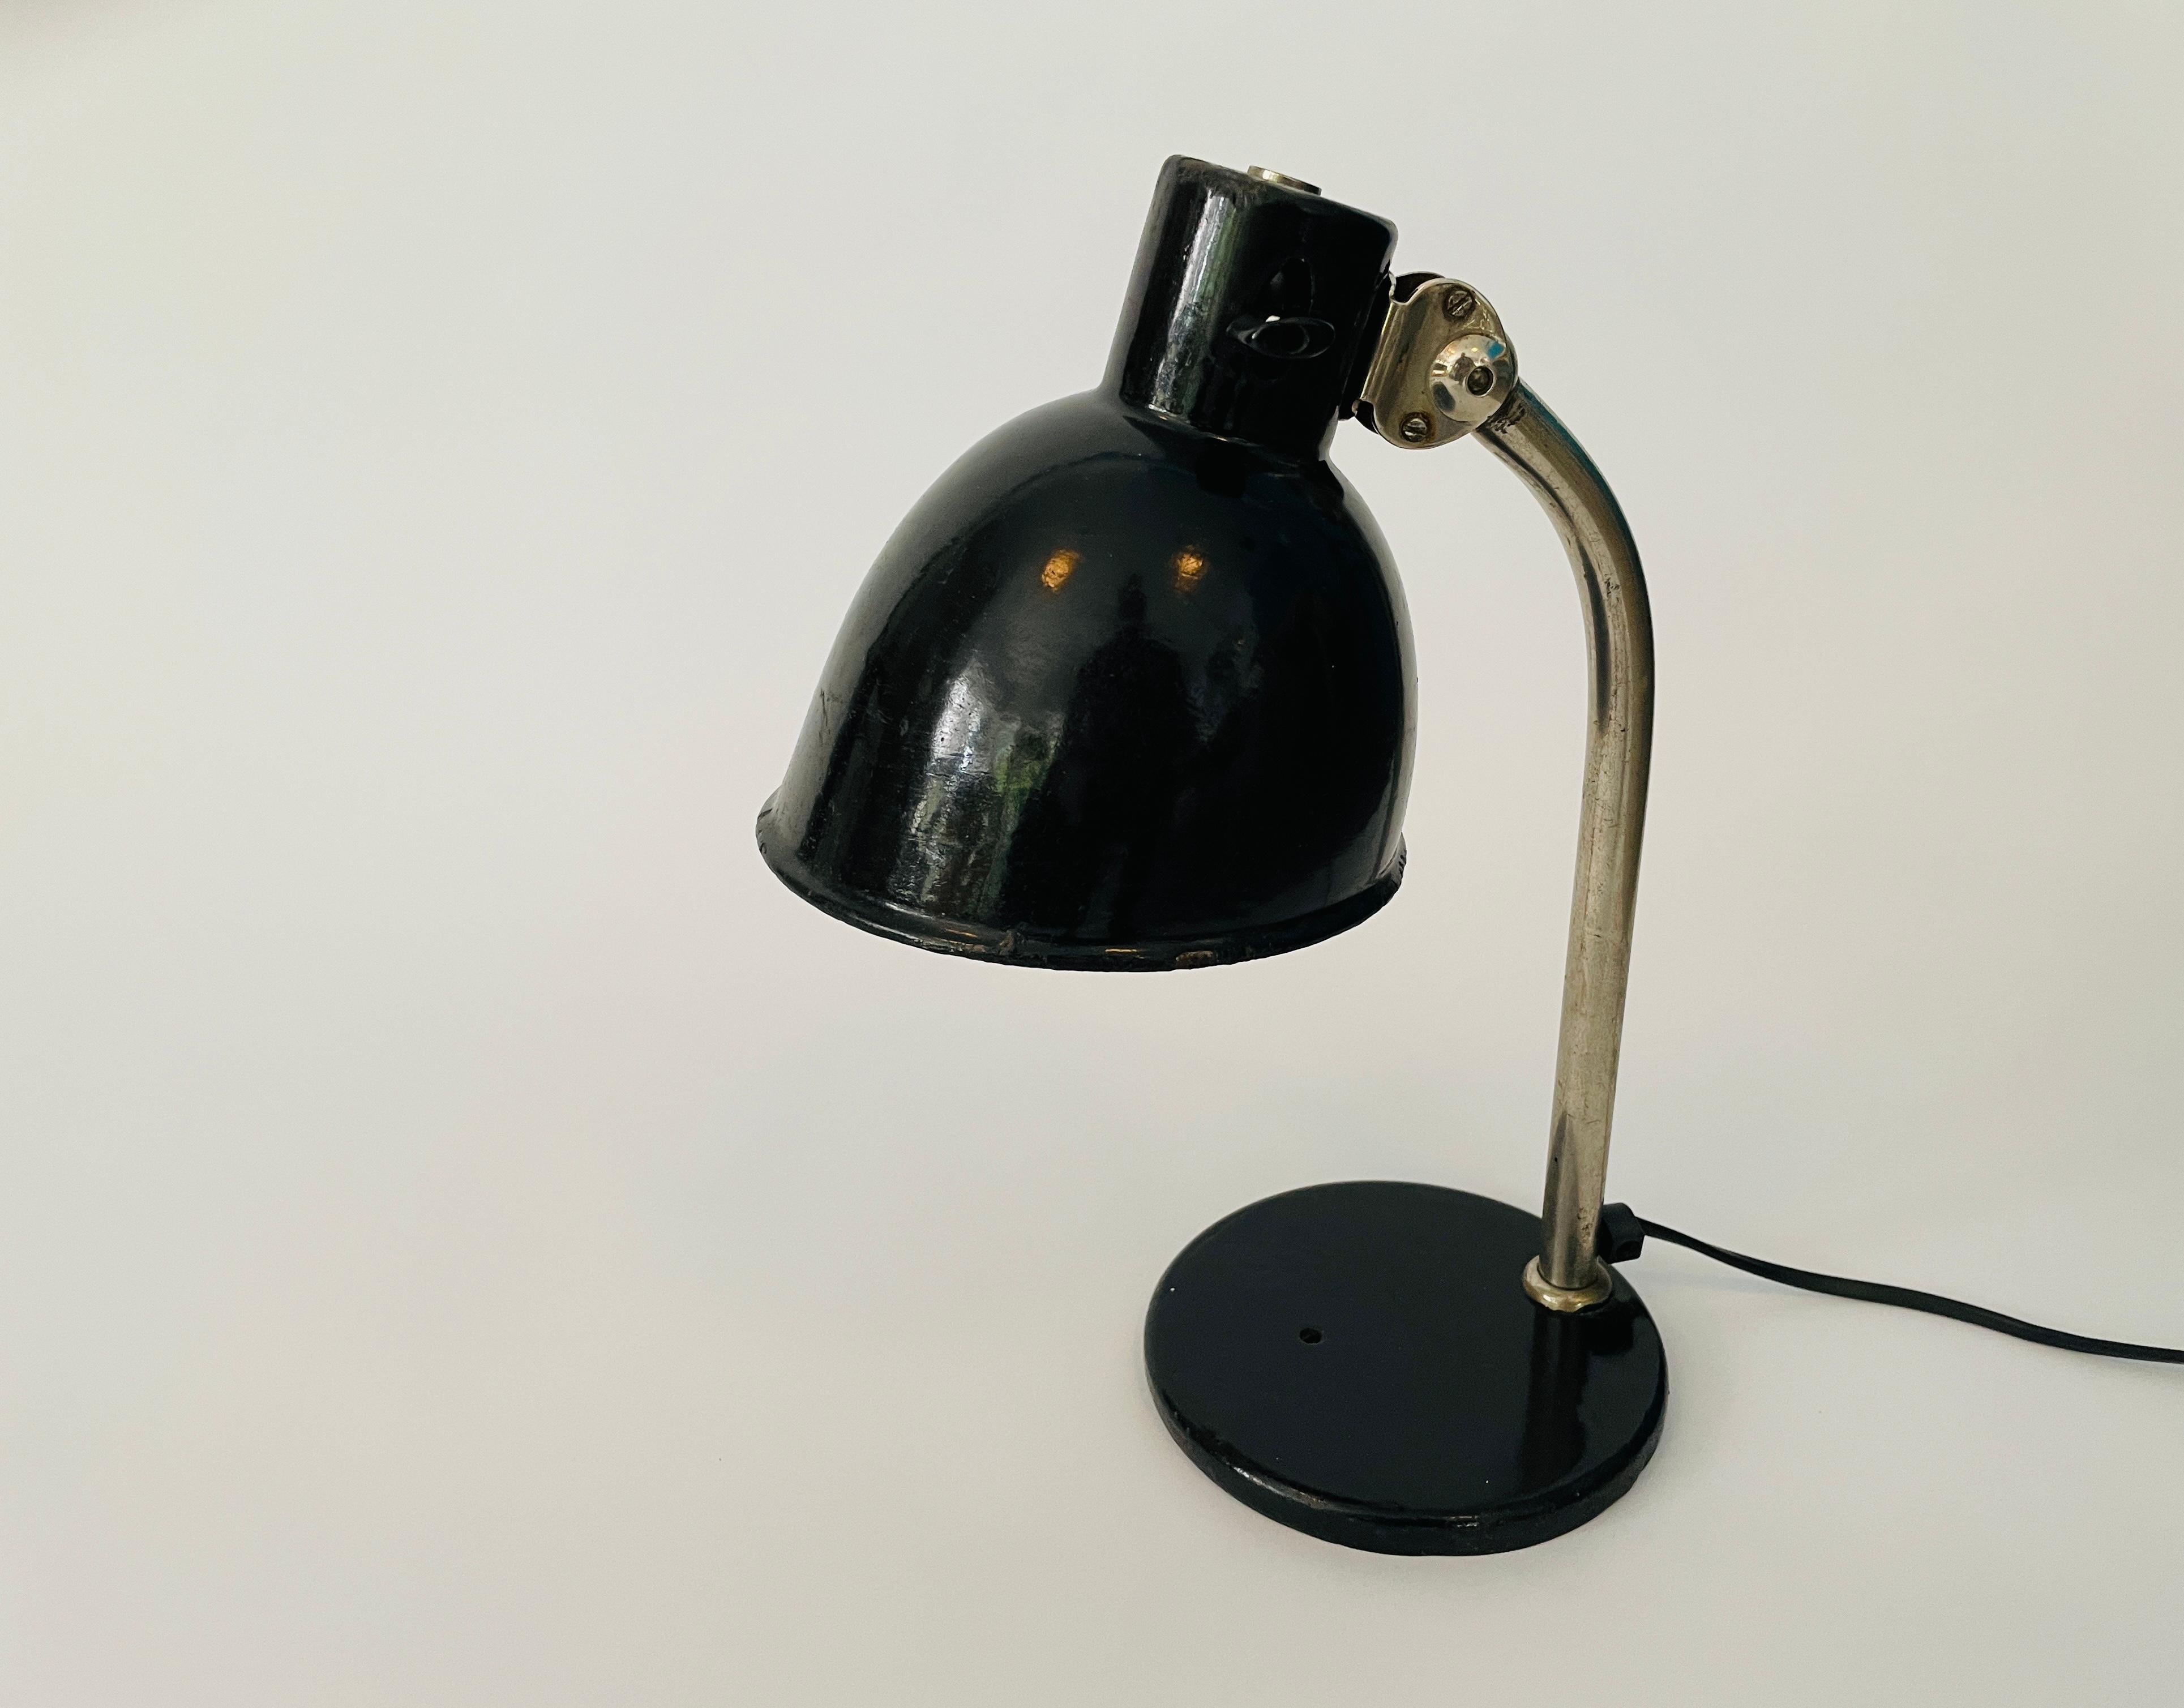 Early Table / Desk lamp by Paavo Tynell for TAITO Oy on 1930´s. Made in Finland. 
Model 5307 was one of the first table lamps what Paavo Tynell designed.
 Original black enamel shade and base with a nickel metal central column. Adjustable shade.